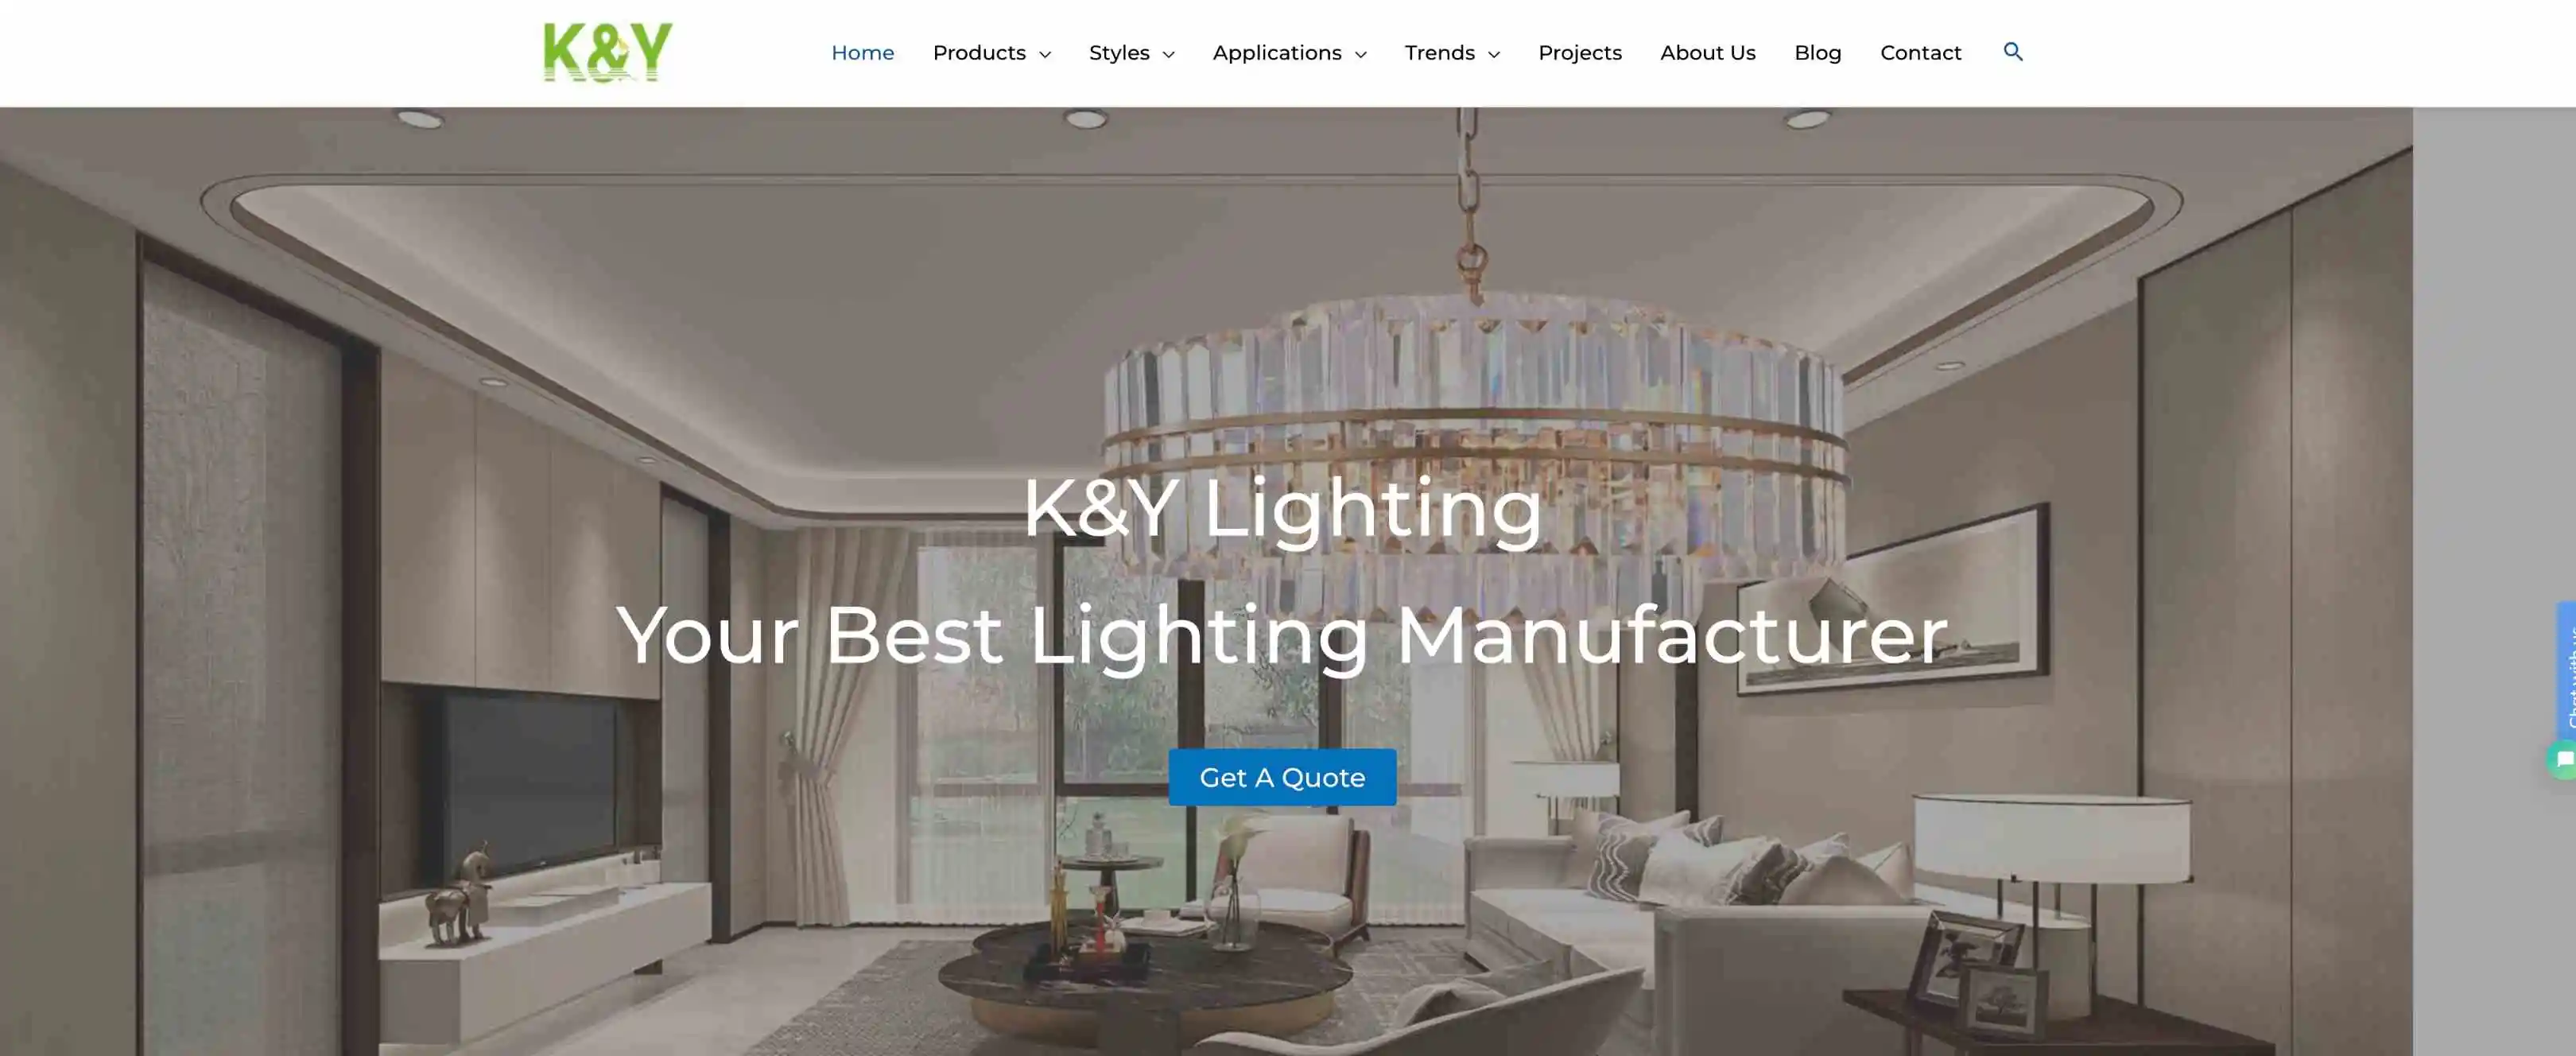 The official website of KY Lighting a leading key lighting manufacturer